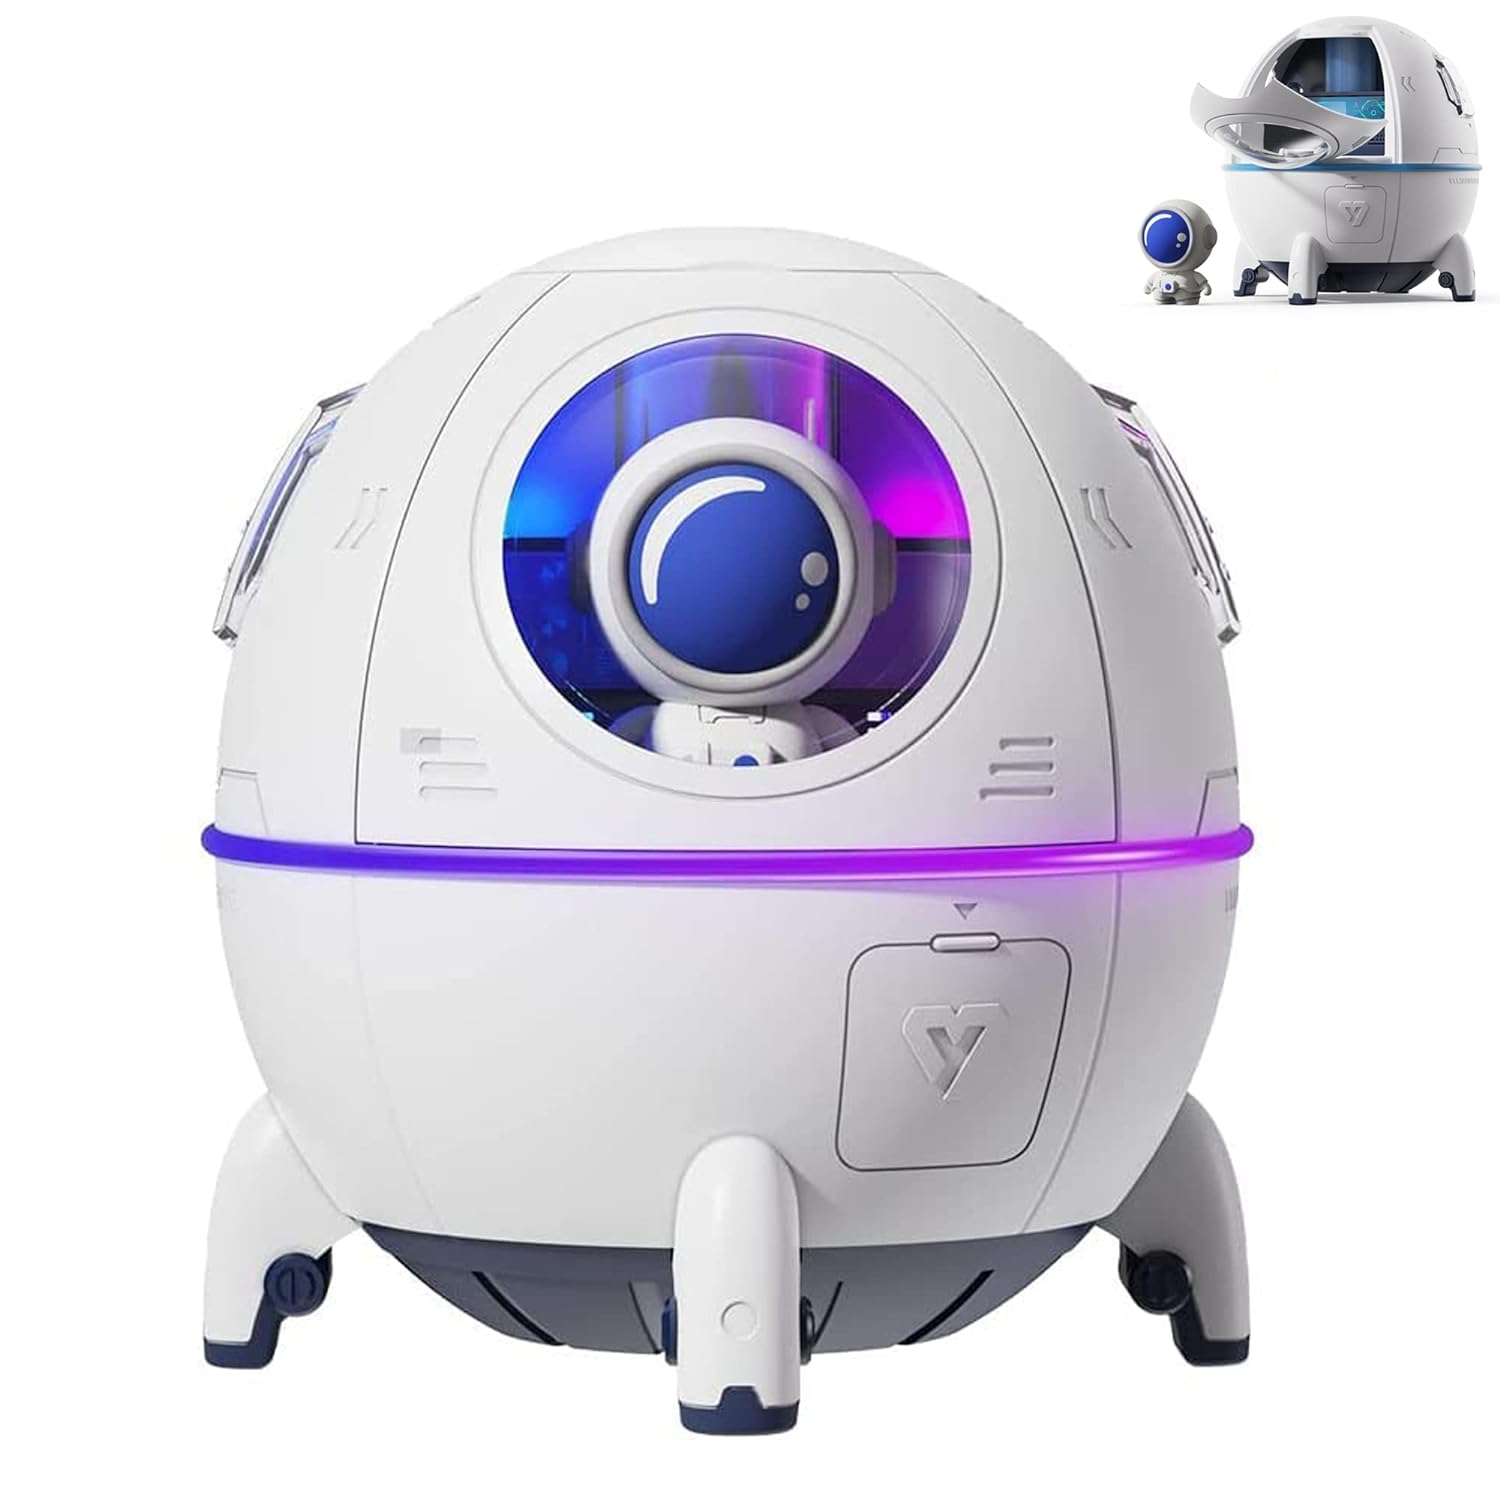 SkyShopy Space Capsule Humidifier, Mini Cute Humidifier, Portable Space Capsule Humidifier, 220ml USB Ultrasonic Quiet Air Humidifiers for Home Car Bedroom Office and Travel